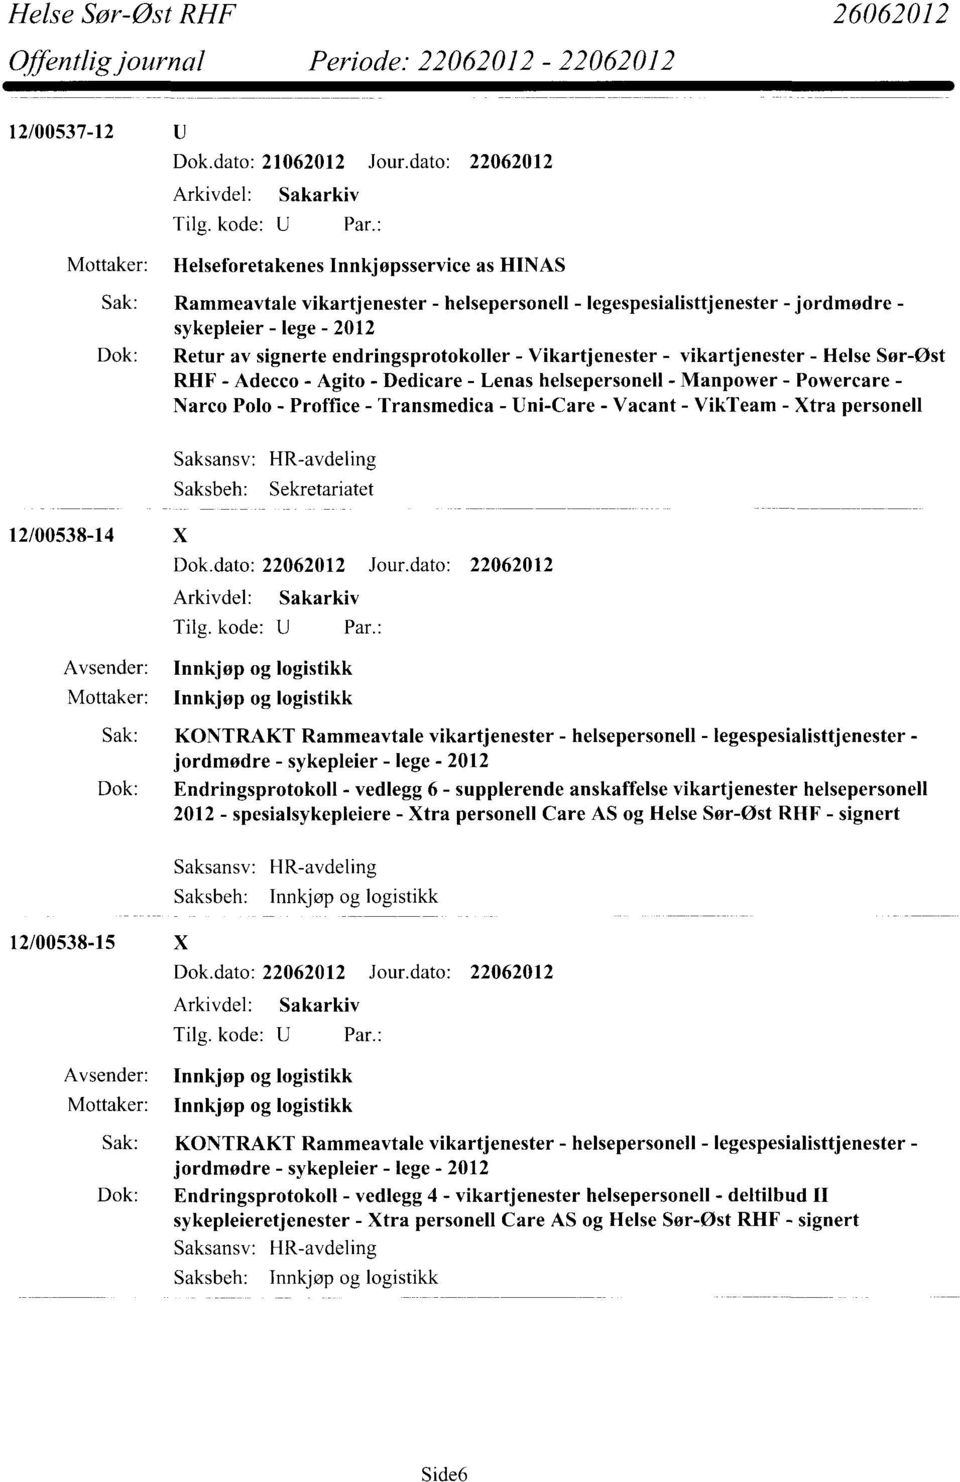 helsepersonell - Manpower - Powercare - Narco Polo - Proffice - Transmedica - Uni-Care - Vacant - VikTeam - Xtra personell Sekretariatet 12/00538-14 X 2012 - spesialsykepleiere - Xtra personell